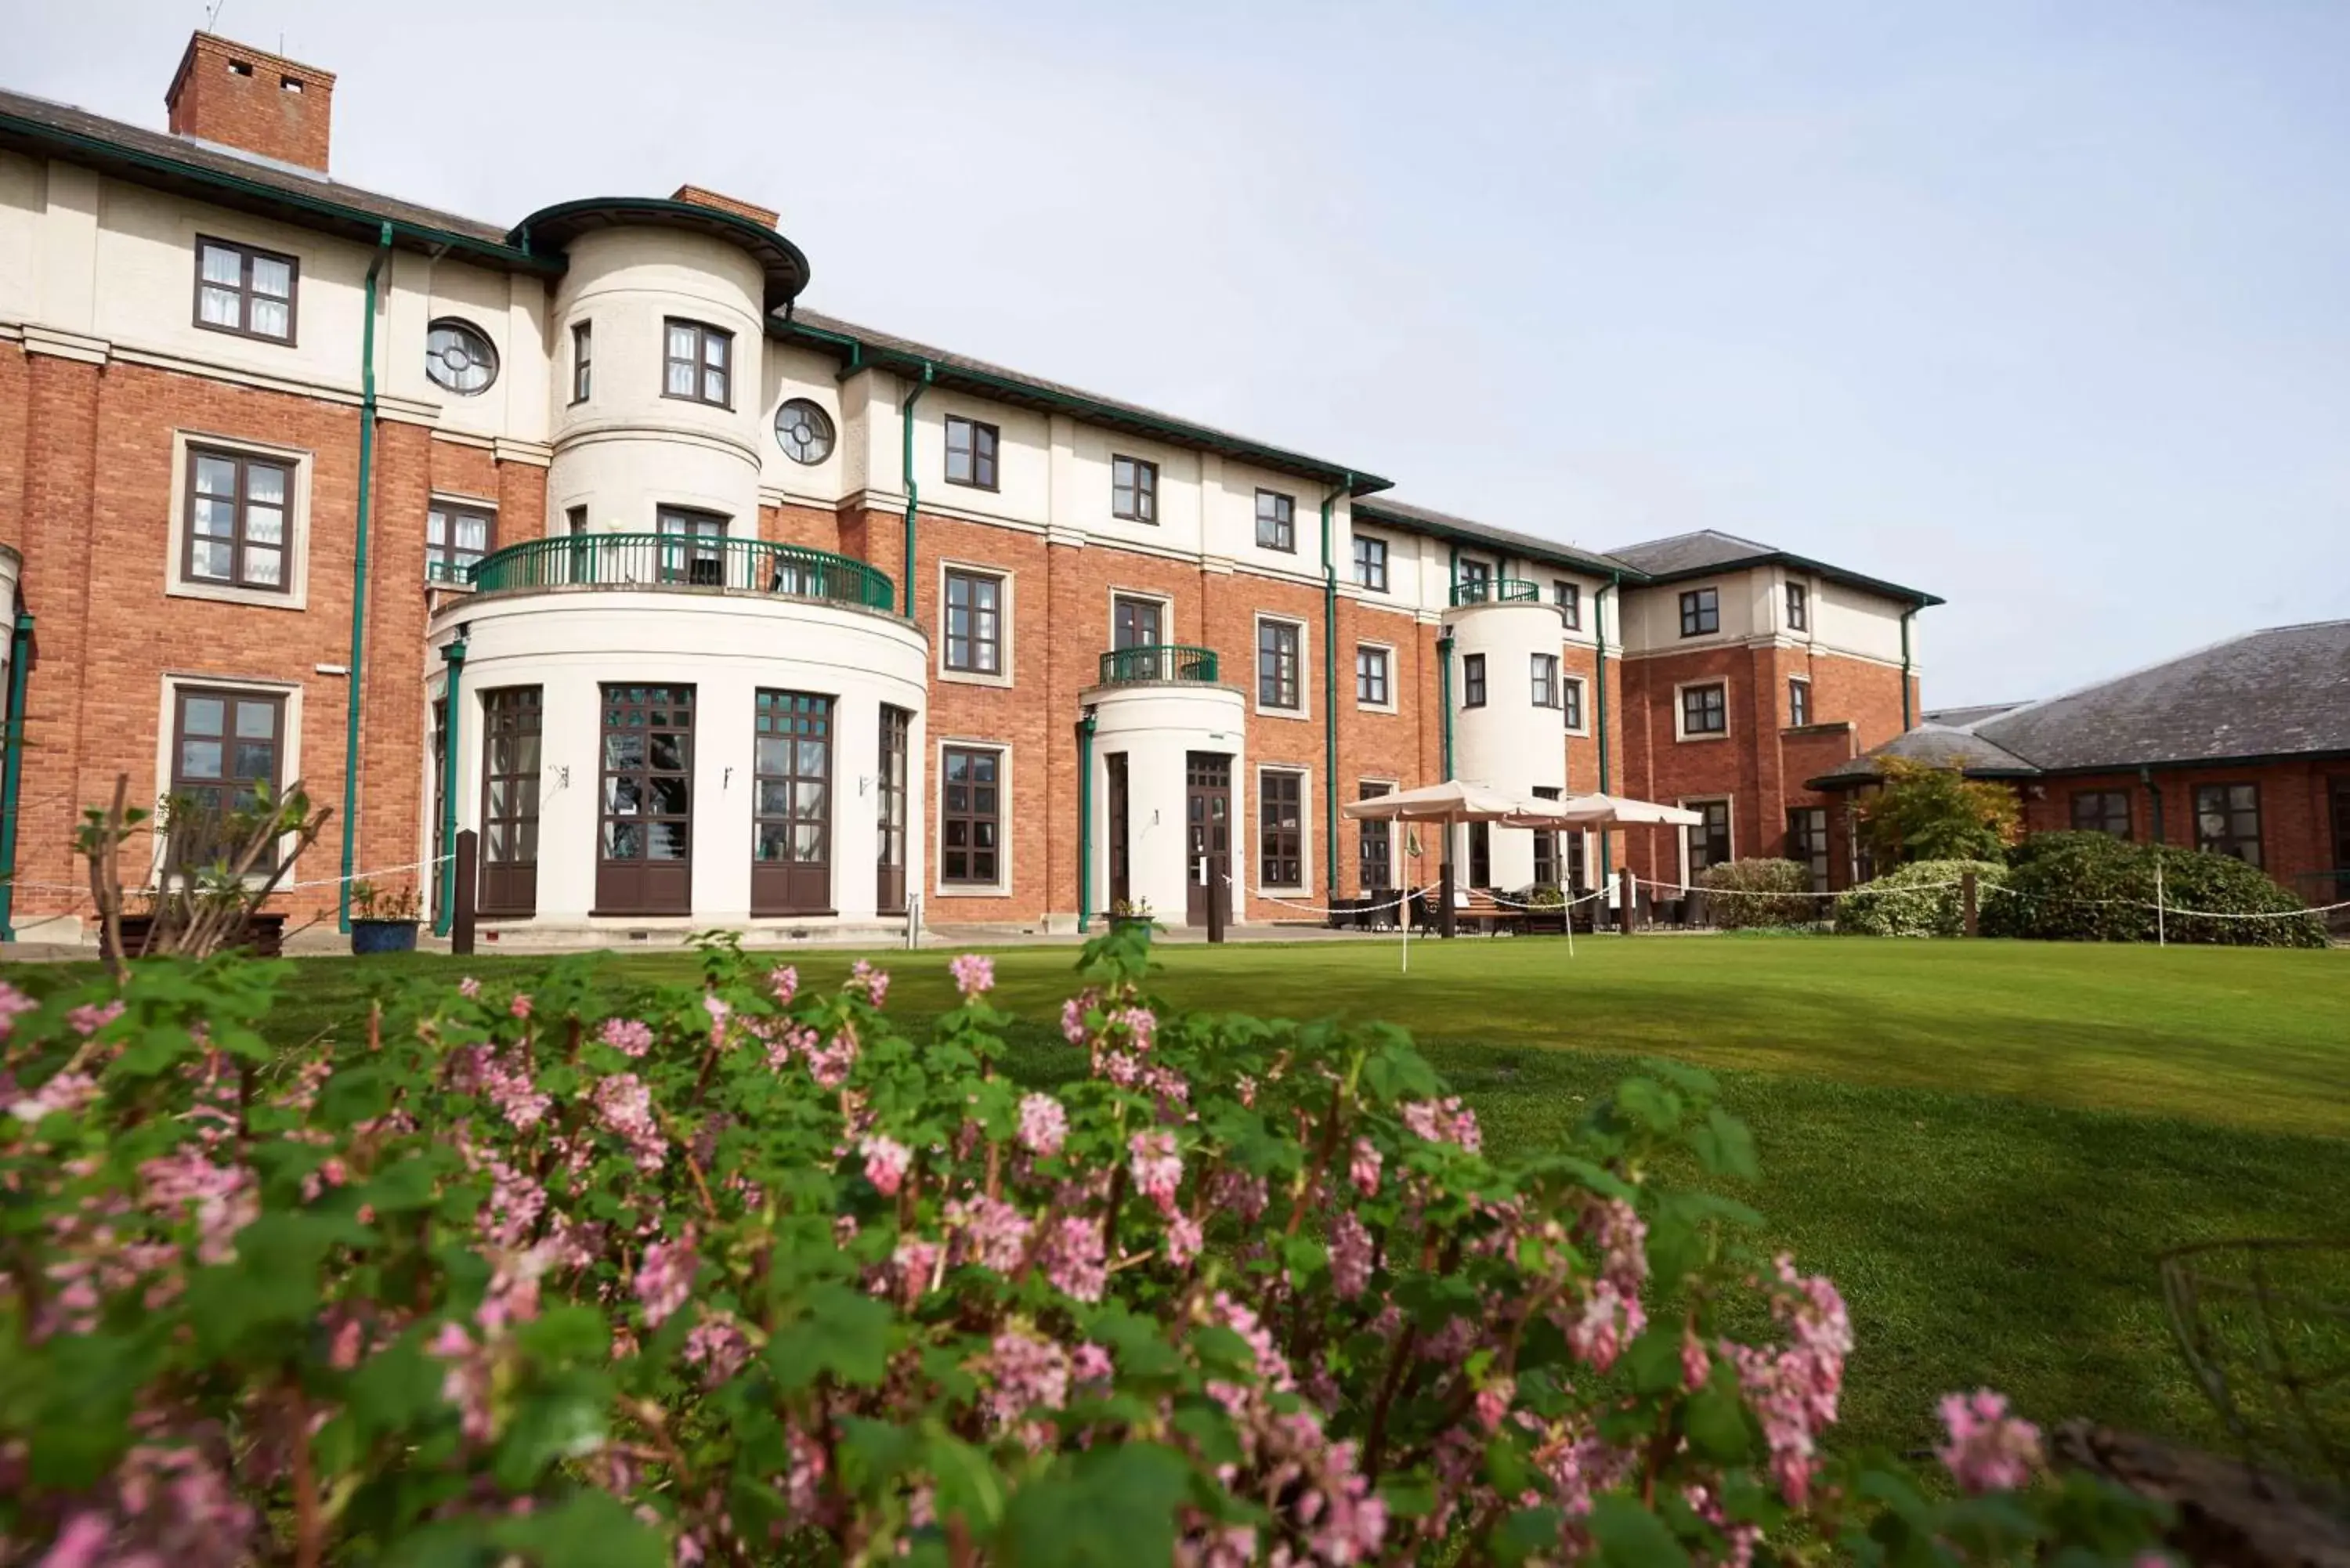 Property Building in Hilton Puckrup Hall, Tewkesbury